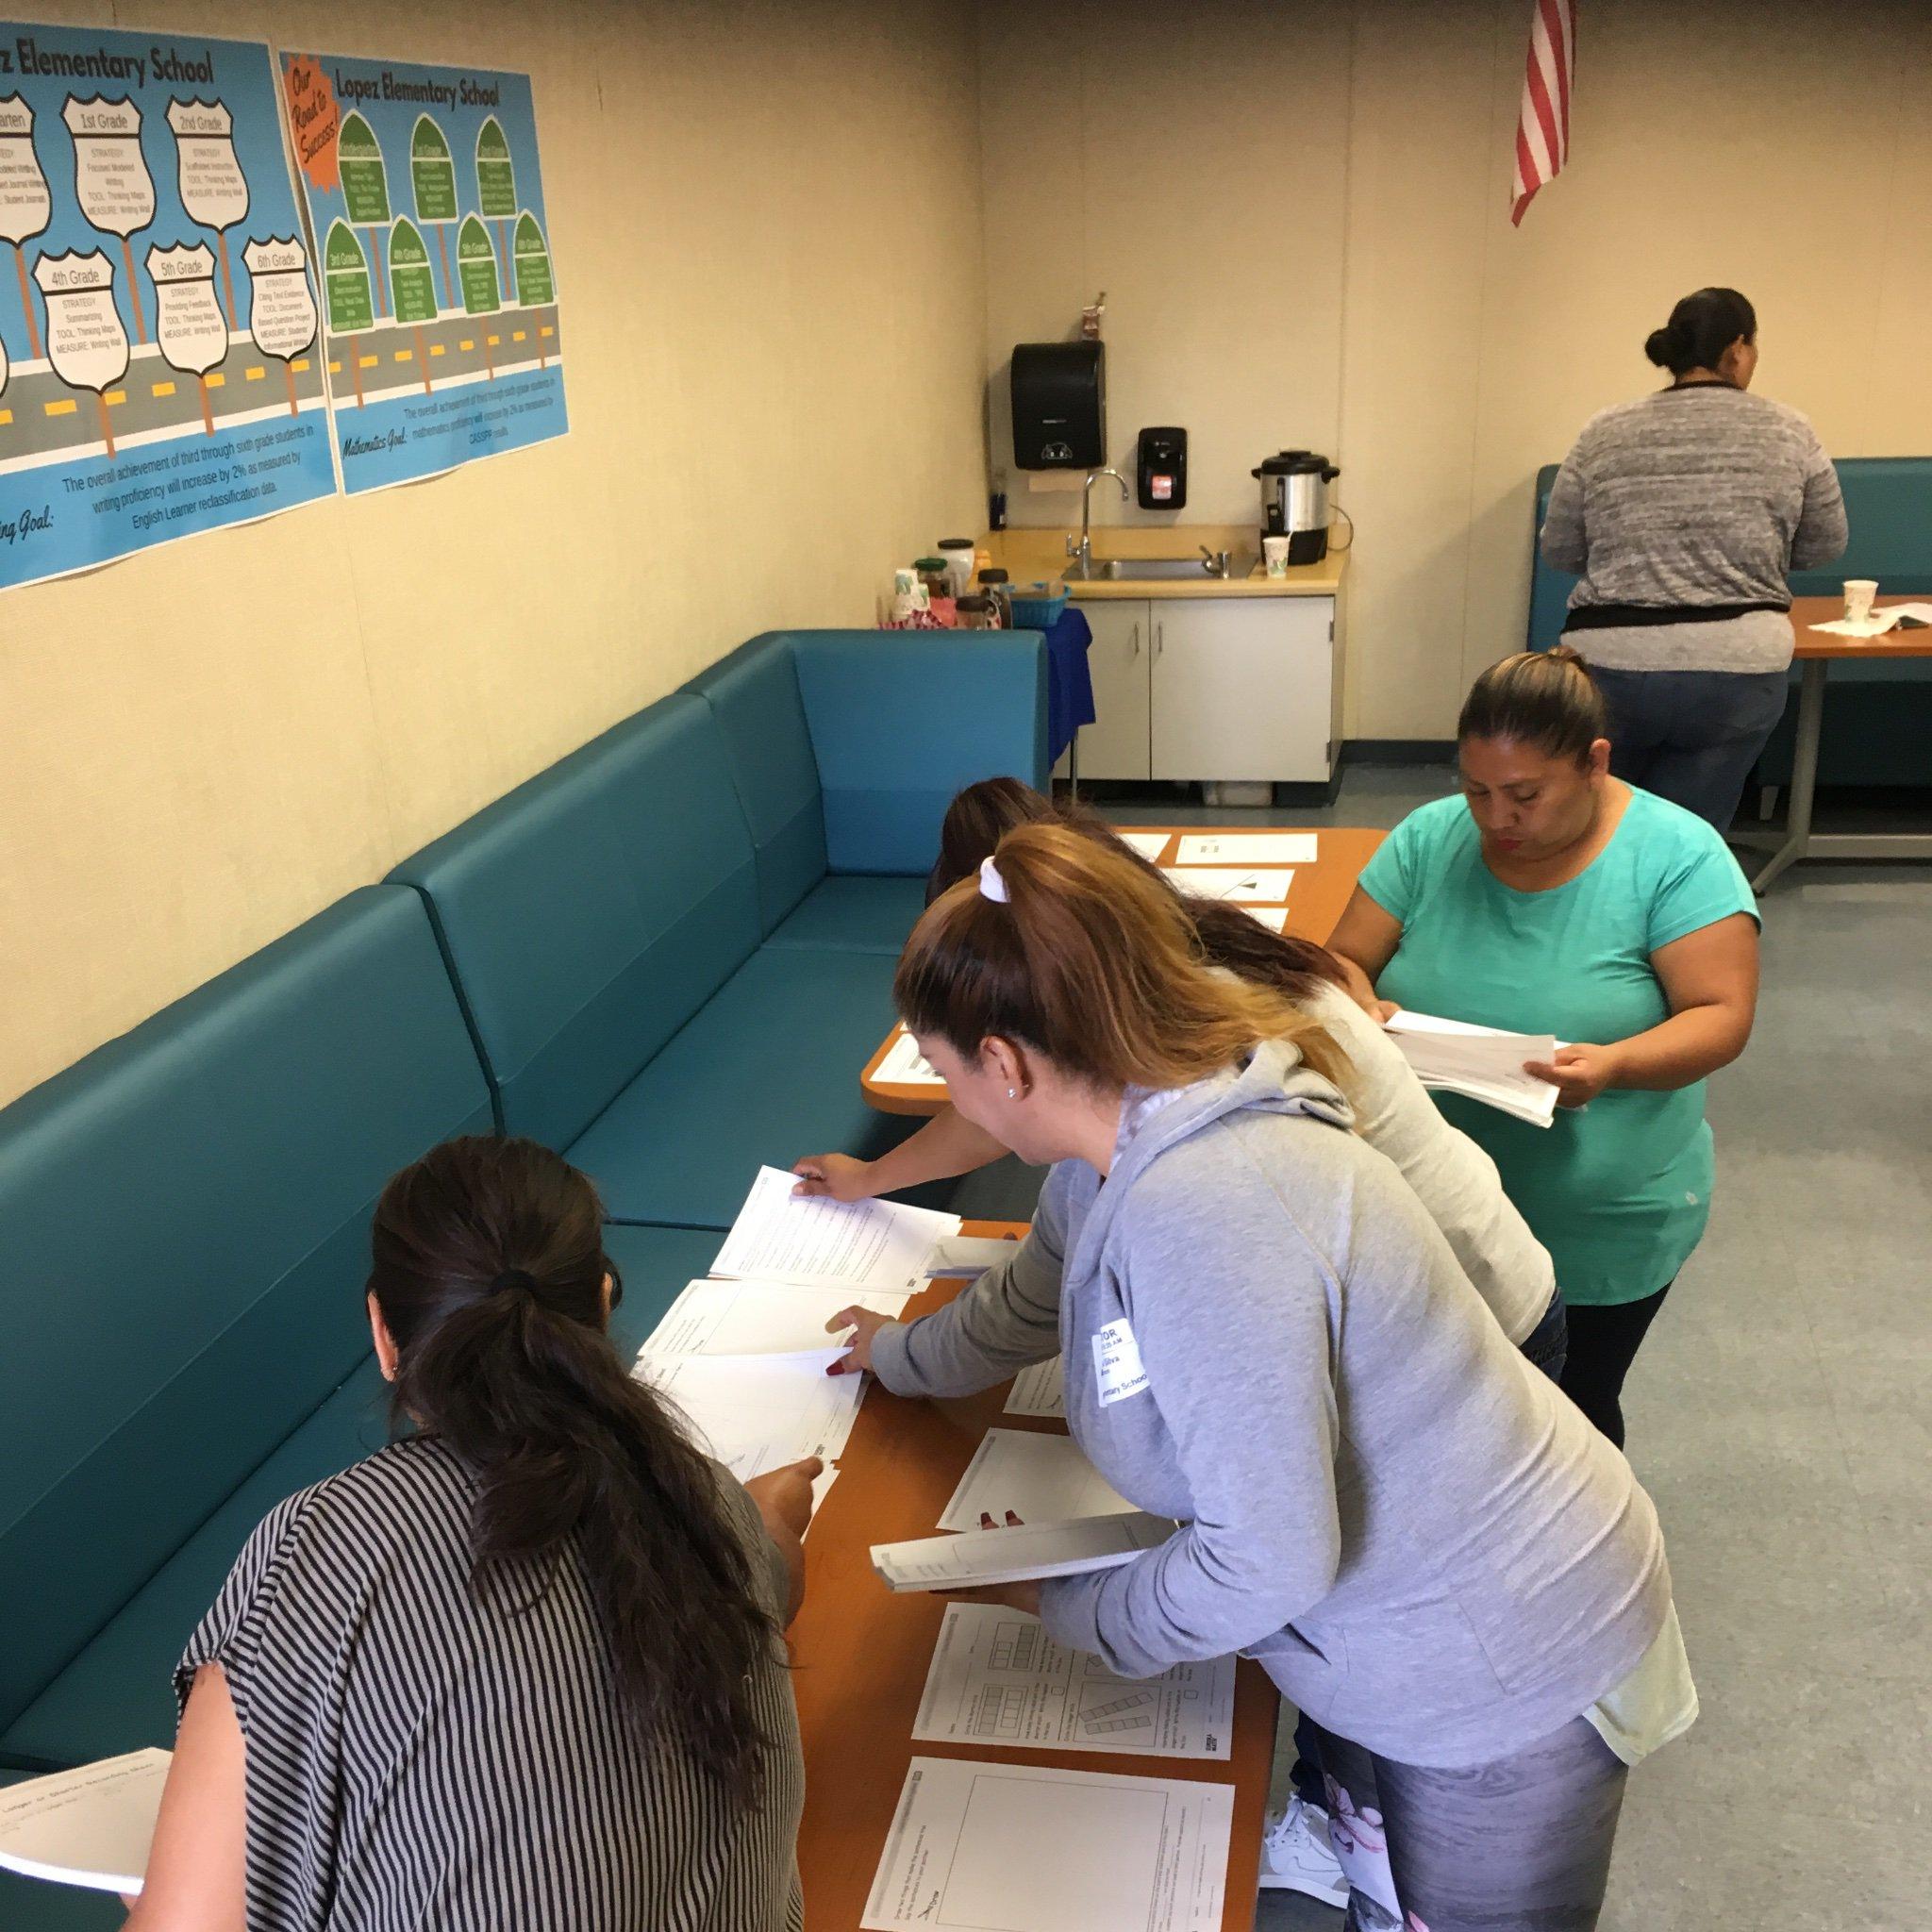 Our Lopez #parents were engaged and learned about the new ELA program, #BenchmarkAdvance, then volunteered to organize #math pages for the #teachers  Thank you for all the support you bring to our school!